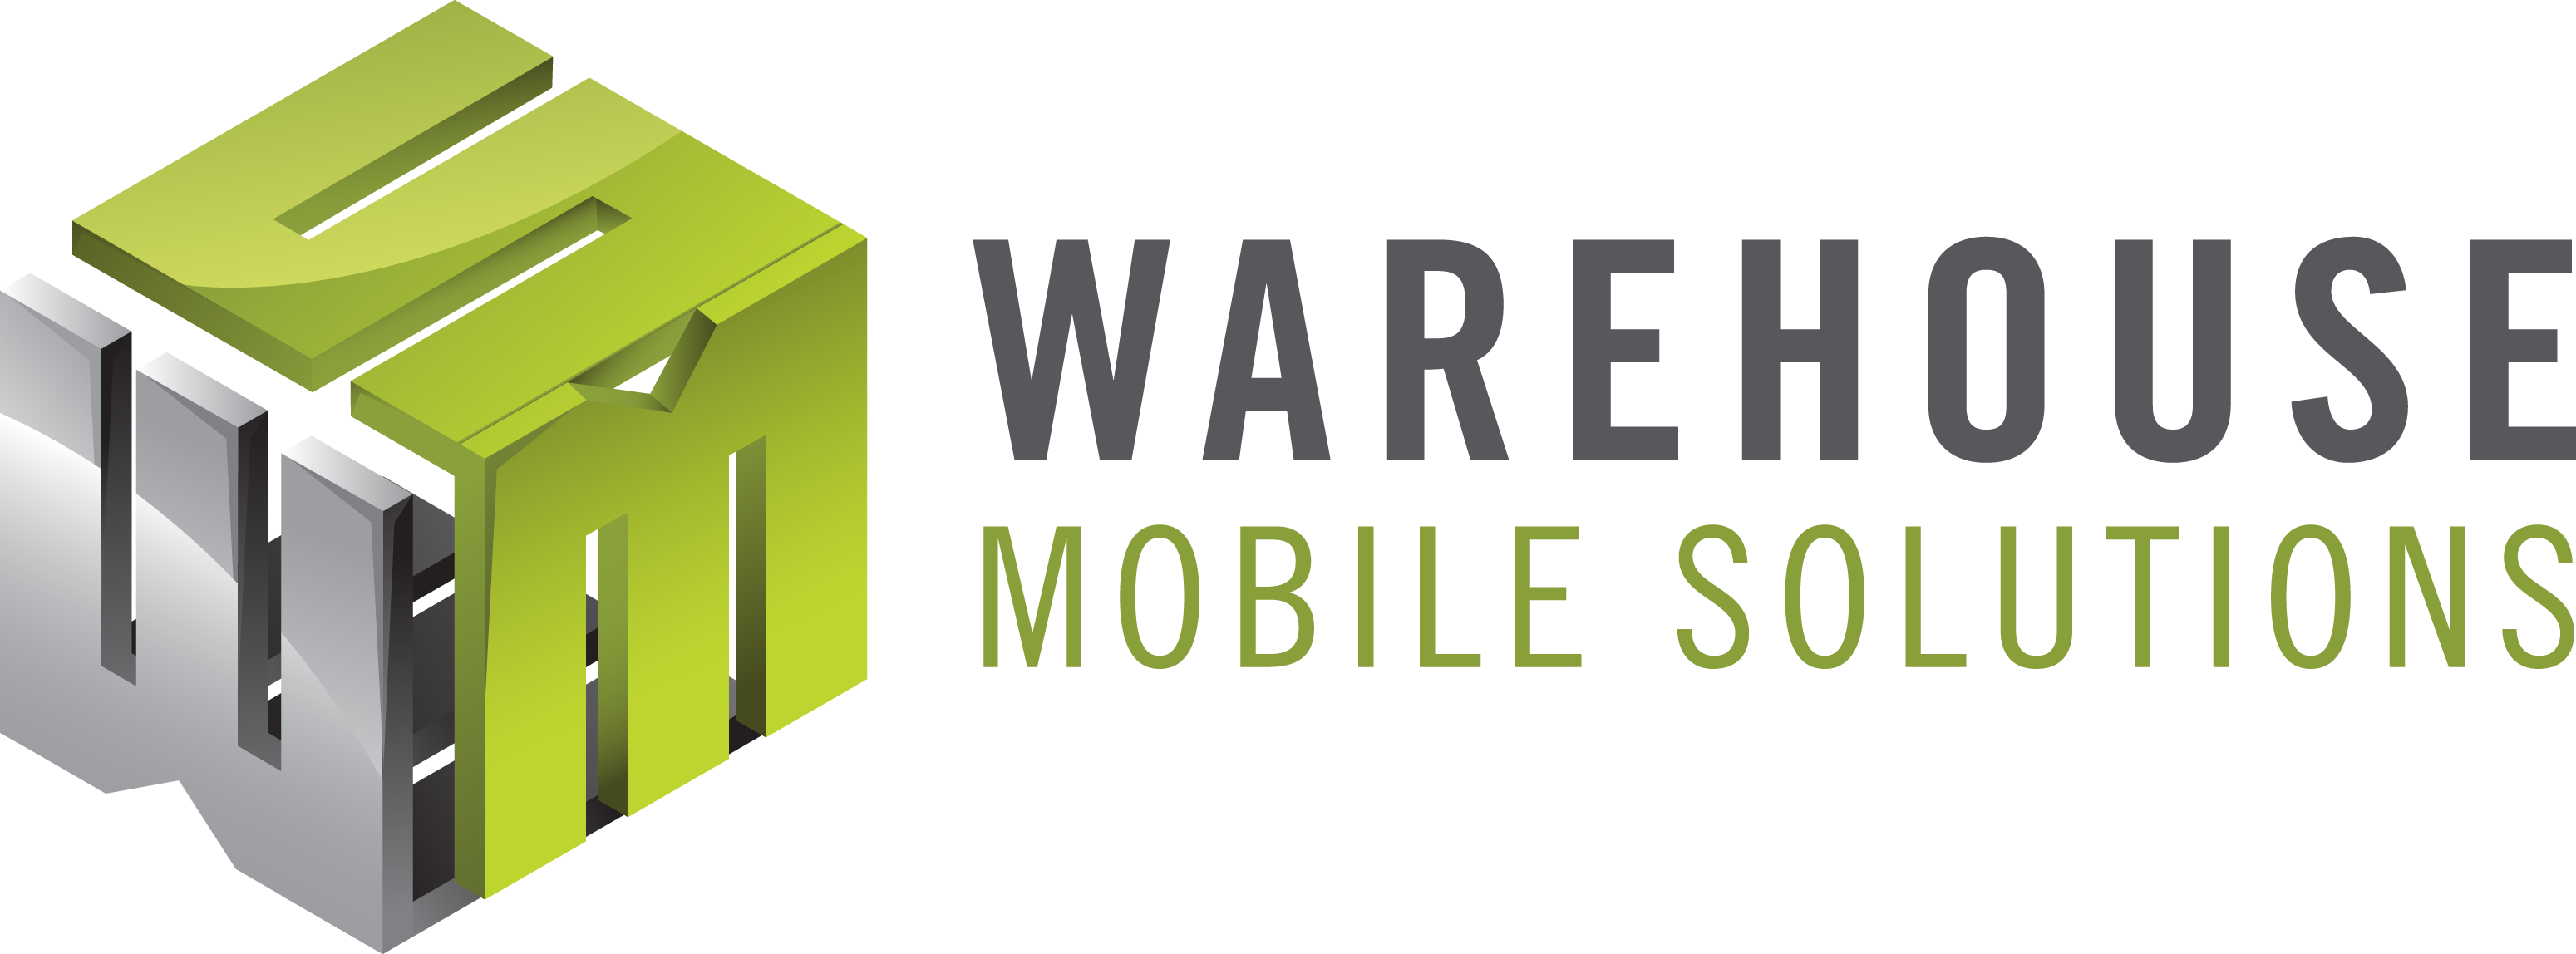 Warehouse Mobile Solutions Logo